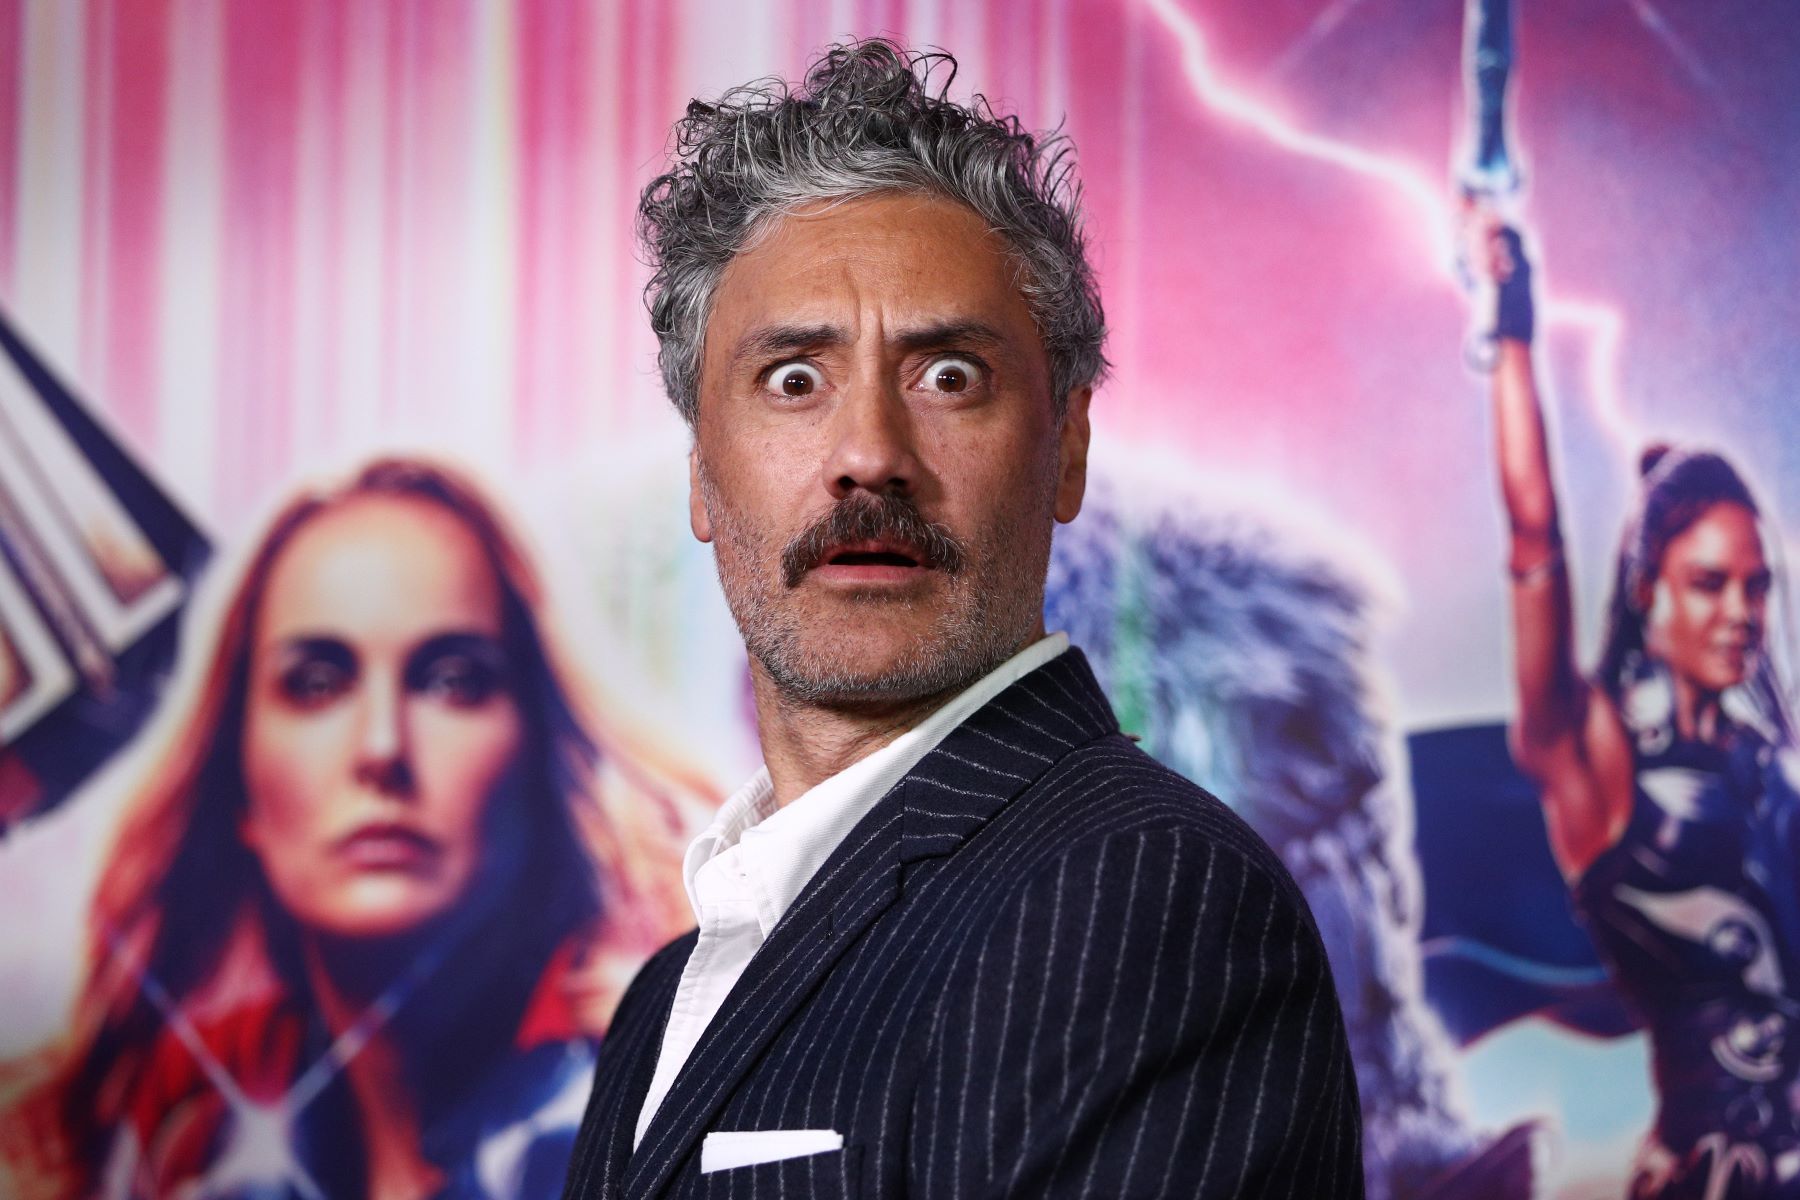 Taika Waititi at the 'Thor: Love and Thunder' premiere at the Hoyts Entertainment Quarter in Sydney, Australia